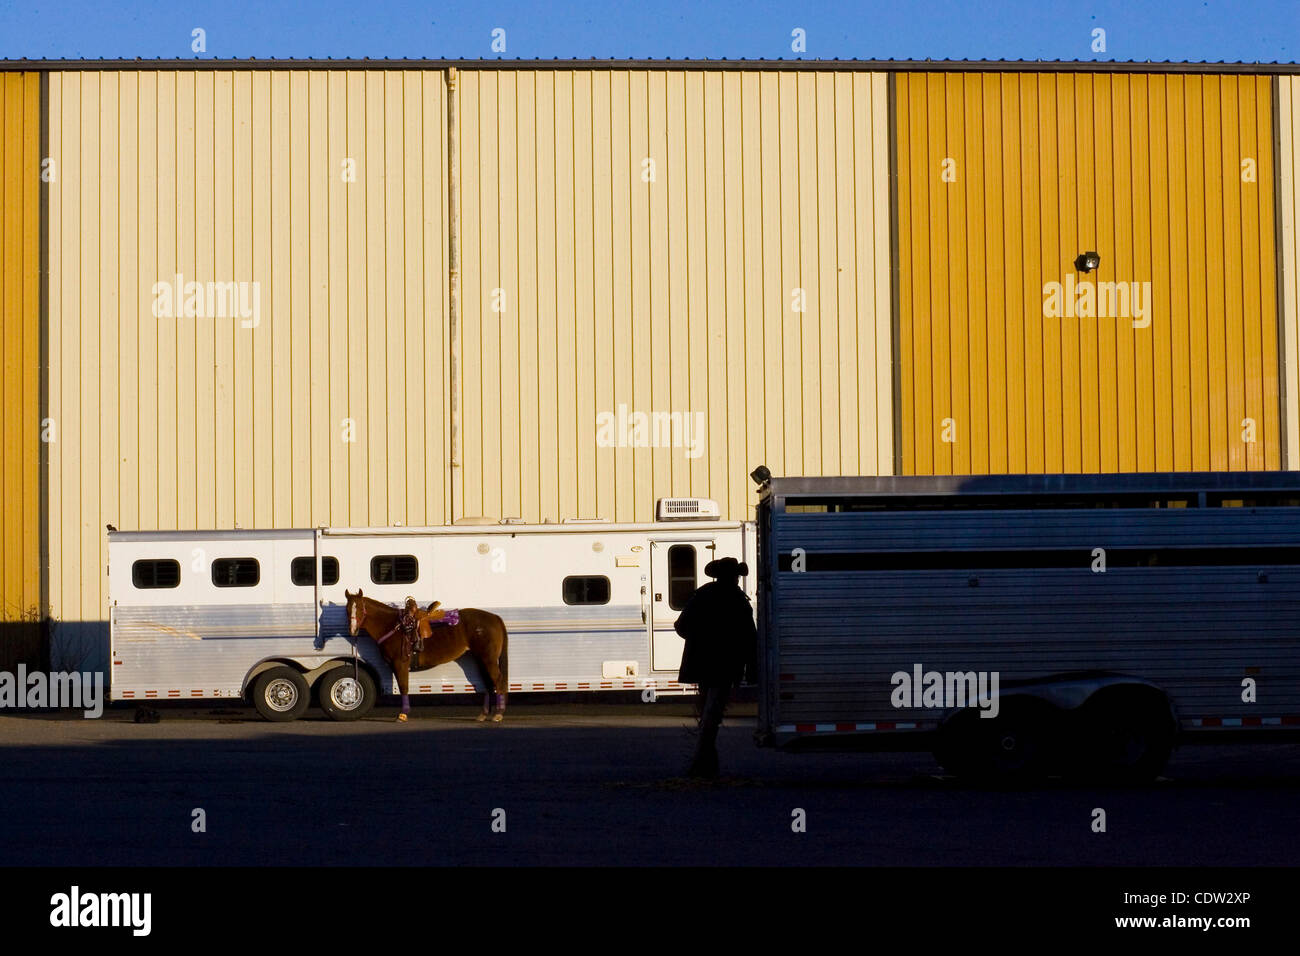 June 7, 2011 - Lynden, WA, U.S. - Mac unloads his trailer of gear and horses before a riding clinic in Lynden, WA. He has attended some of the most prestigious events of such nature for a better part of his adult life, yet continues to enjoy training and teaching eager, young riders. (Credit Image:  Stock Photo